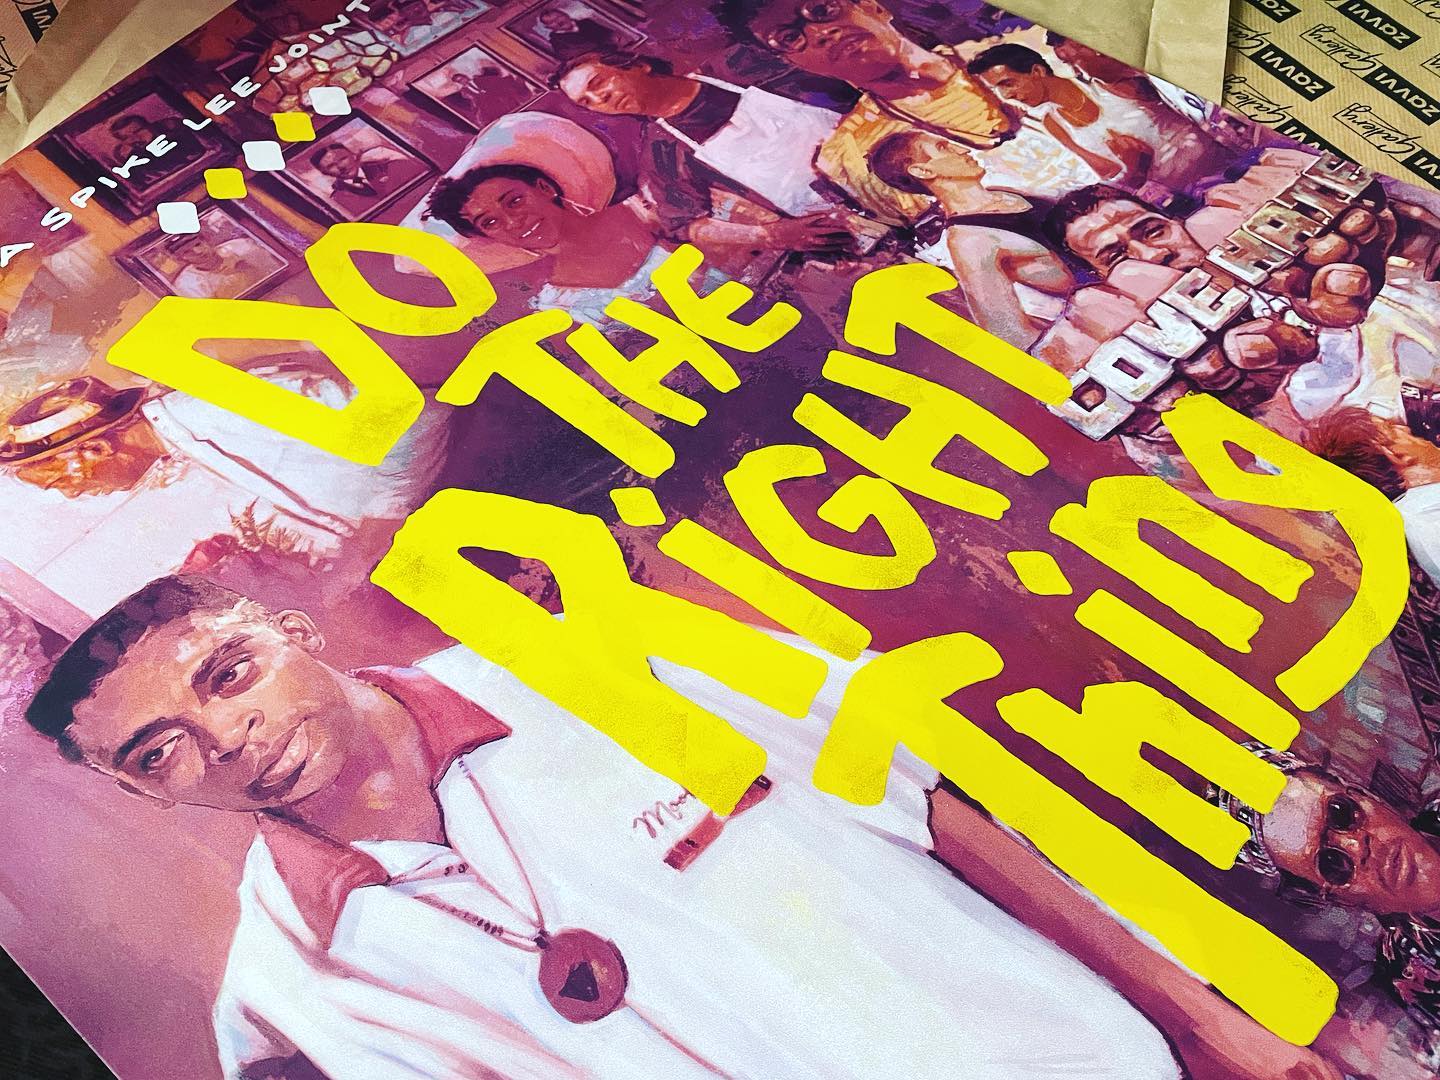 Tremendous work from @vladrodriguez.art … Spike Lee’s ‘Do The Right Thing.’ #spikelee #dotherightthing #amp #screenprint #vladrodriguez #art